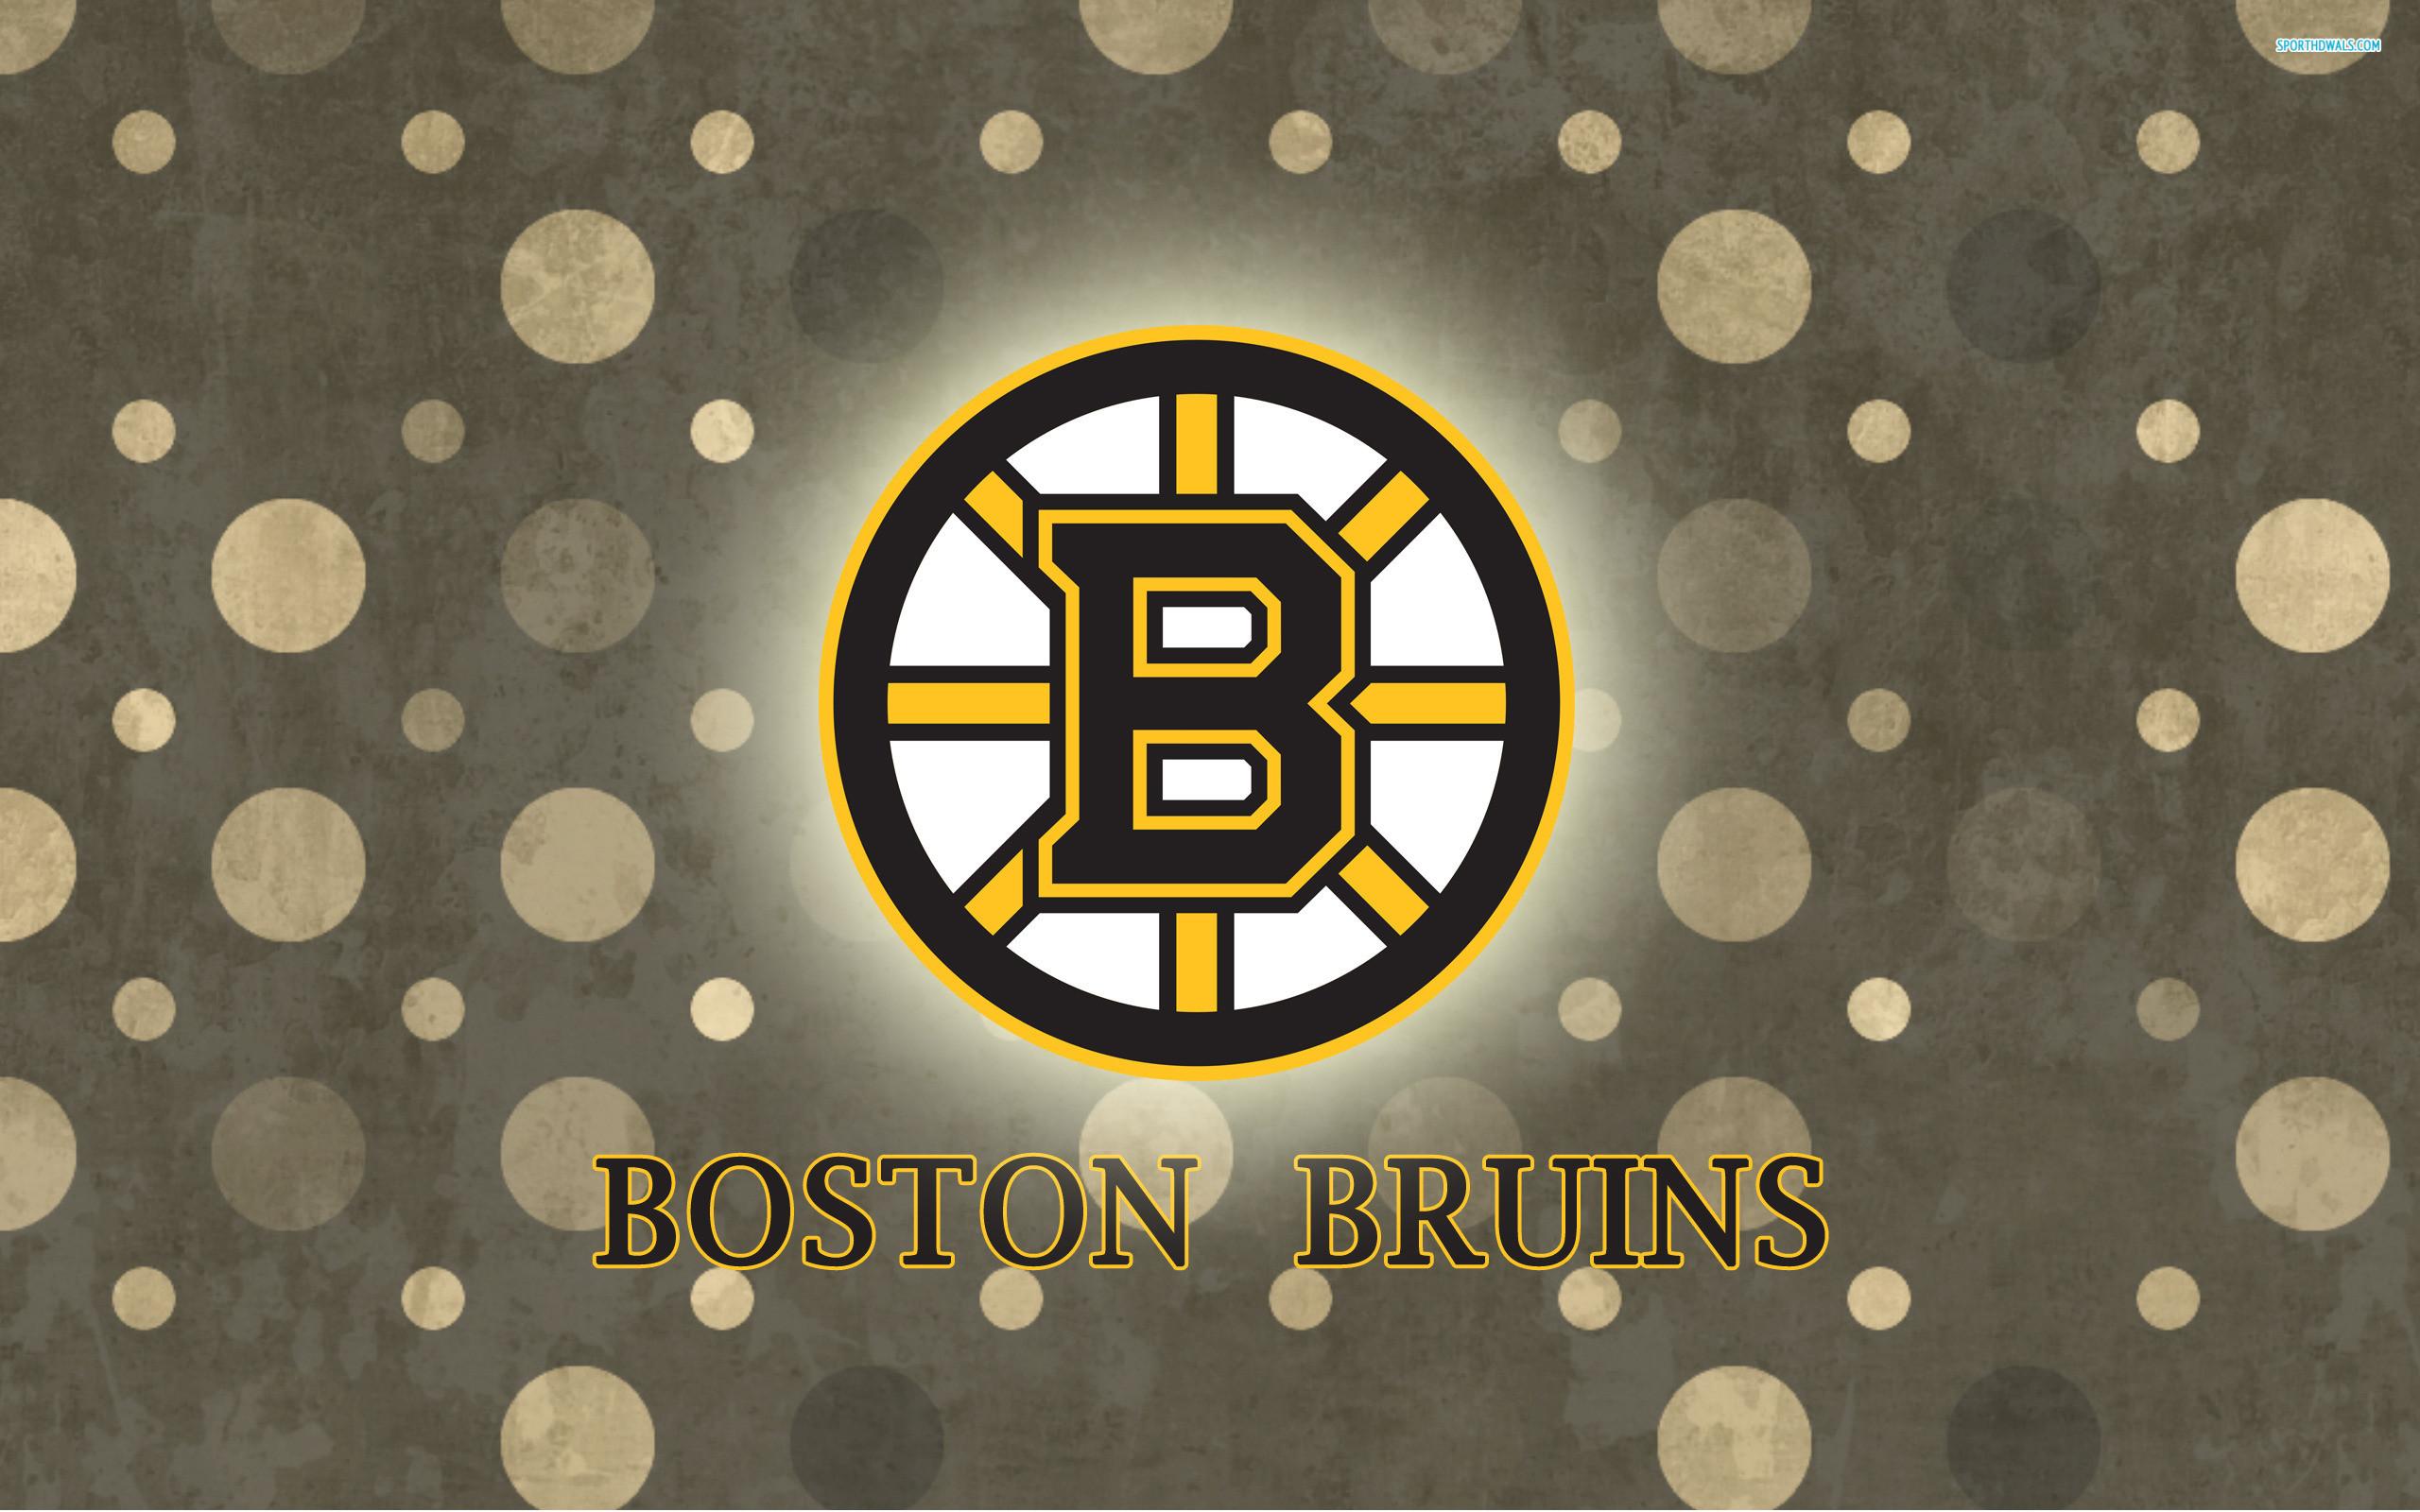 Download wallpapers Boston Bruins golden logo NHL yellow metal background  american hockey team National Hockey League Boston Bruins logo hockey  USA for desktop free Pictures for desktop free